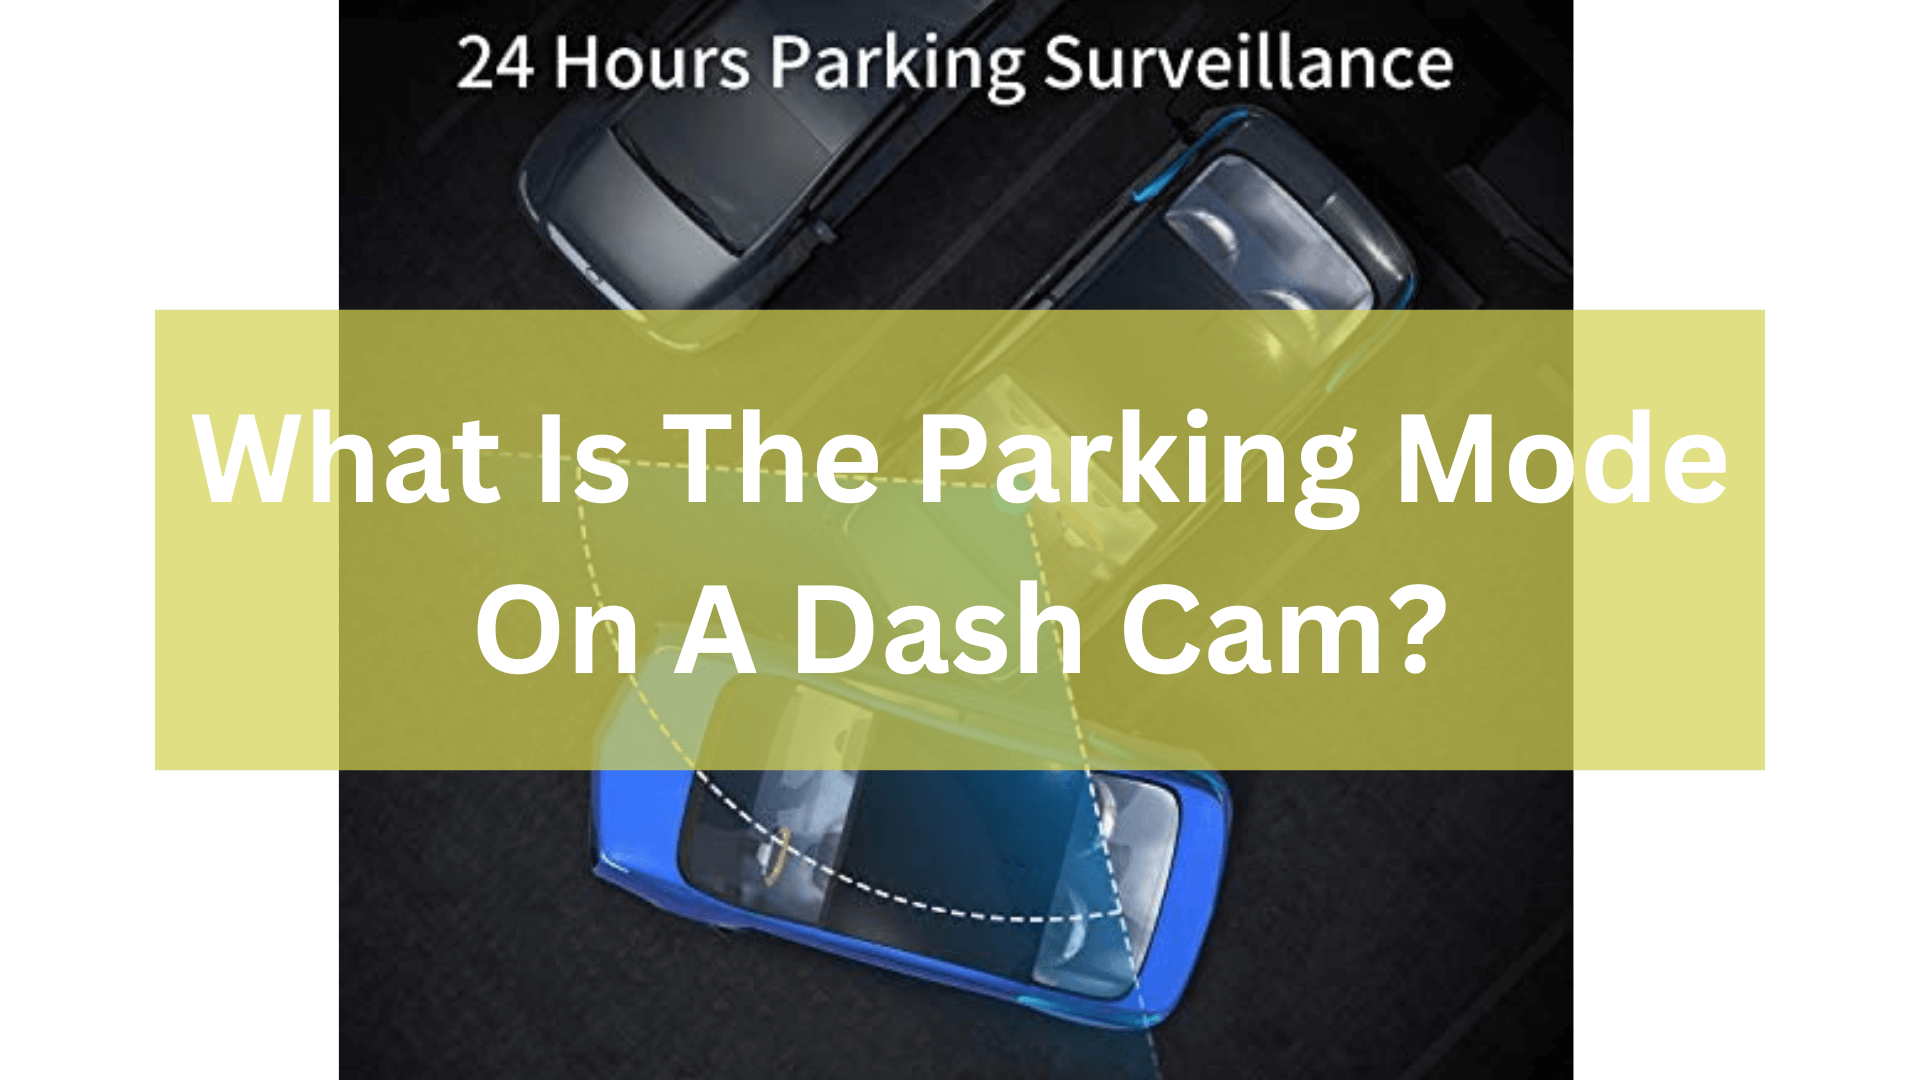 https://dashcamdetails.com/wp-content/uploads/2023/03/What-Is-The-Parking-Mode-On-A-Dash-Cam.png